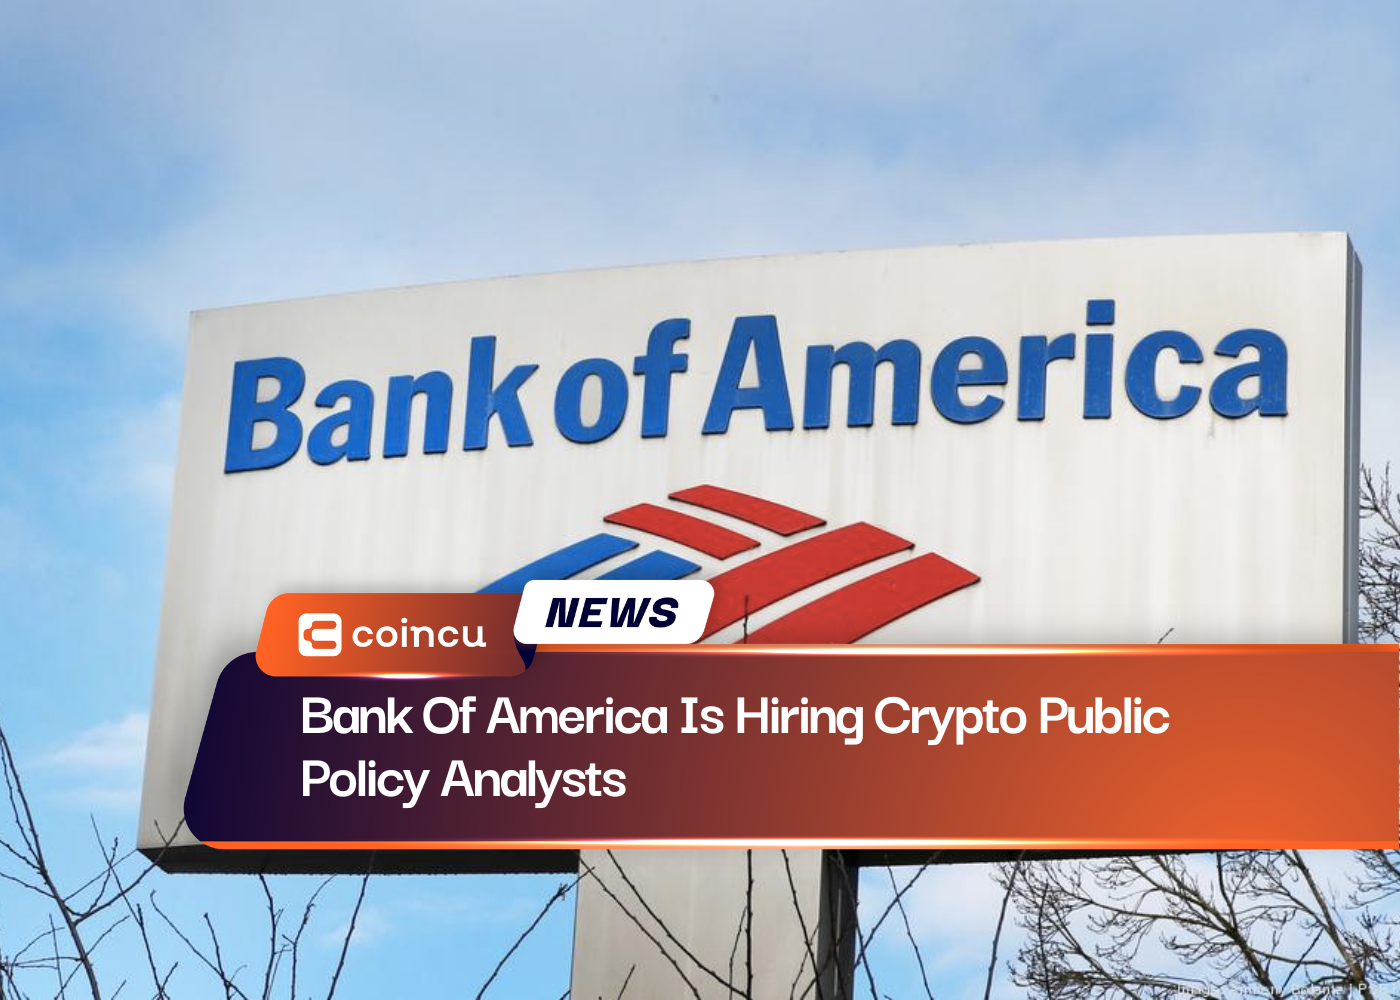 Bank Of America Is Hiring Crypto Public Policy Analysts